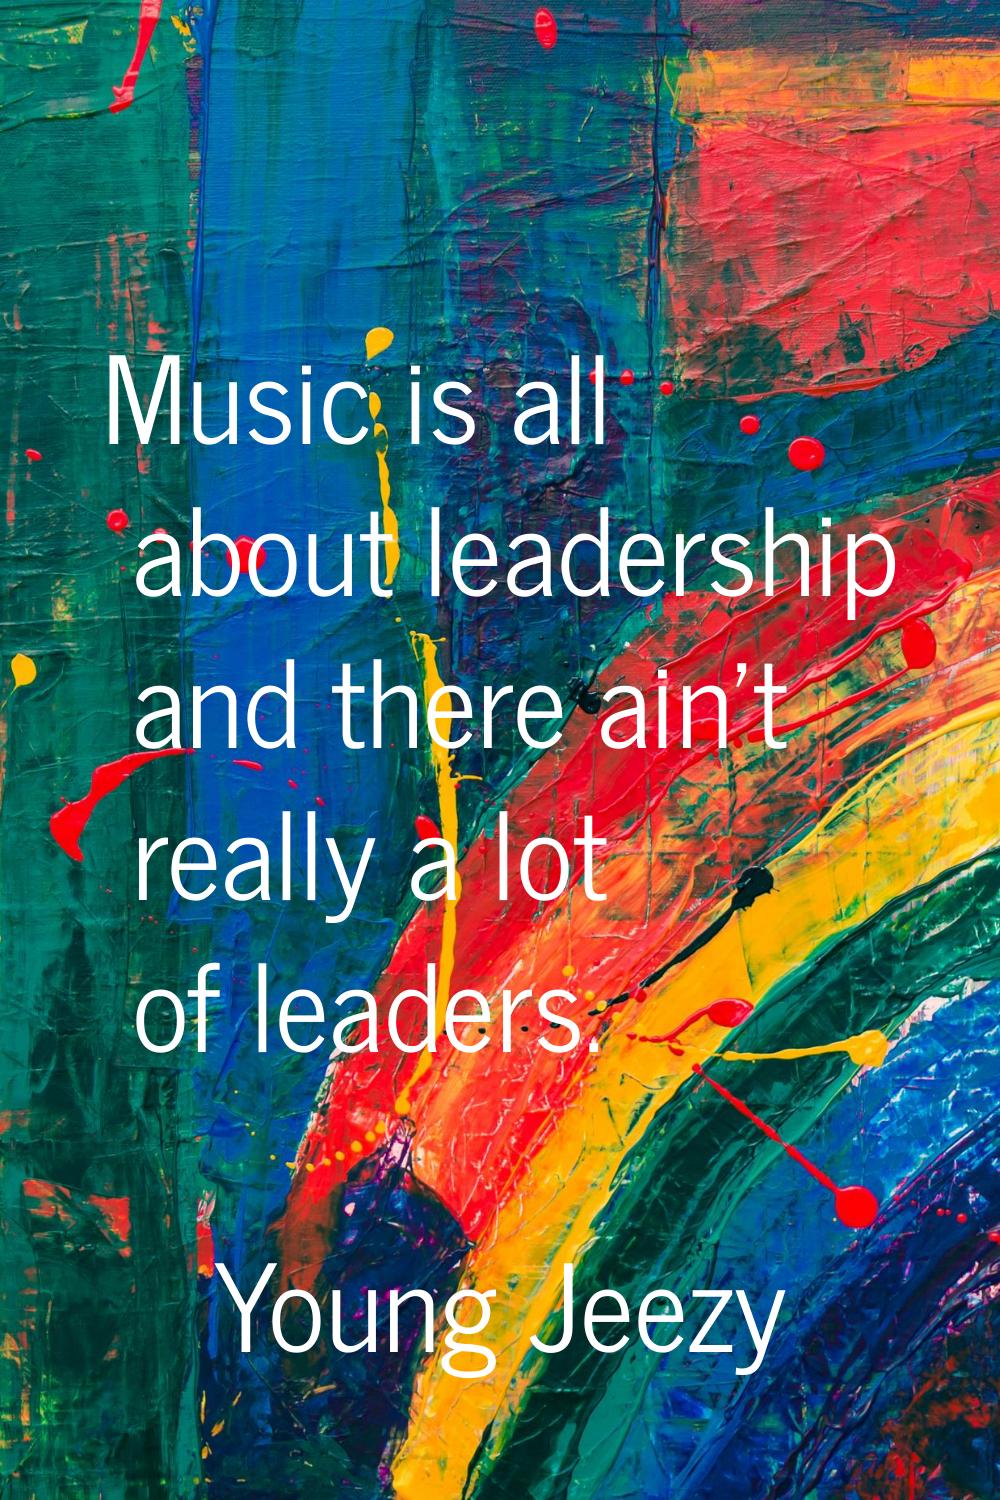 Music is all about leadership and there ain't really a lot of leaders.